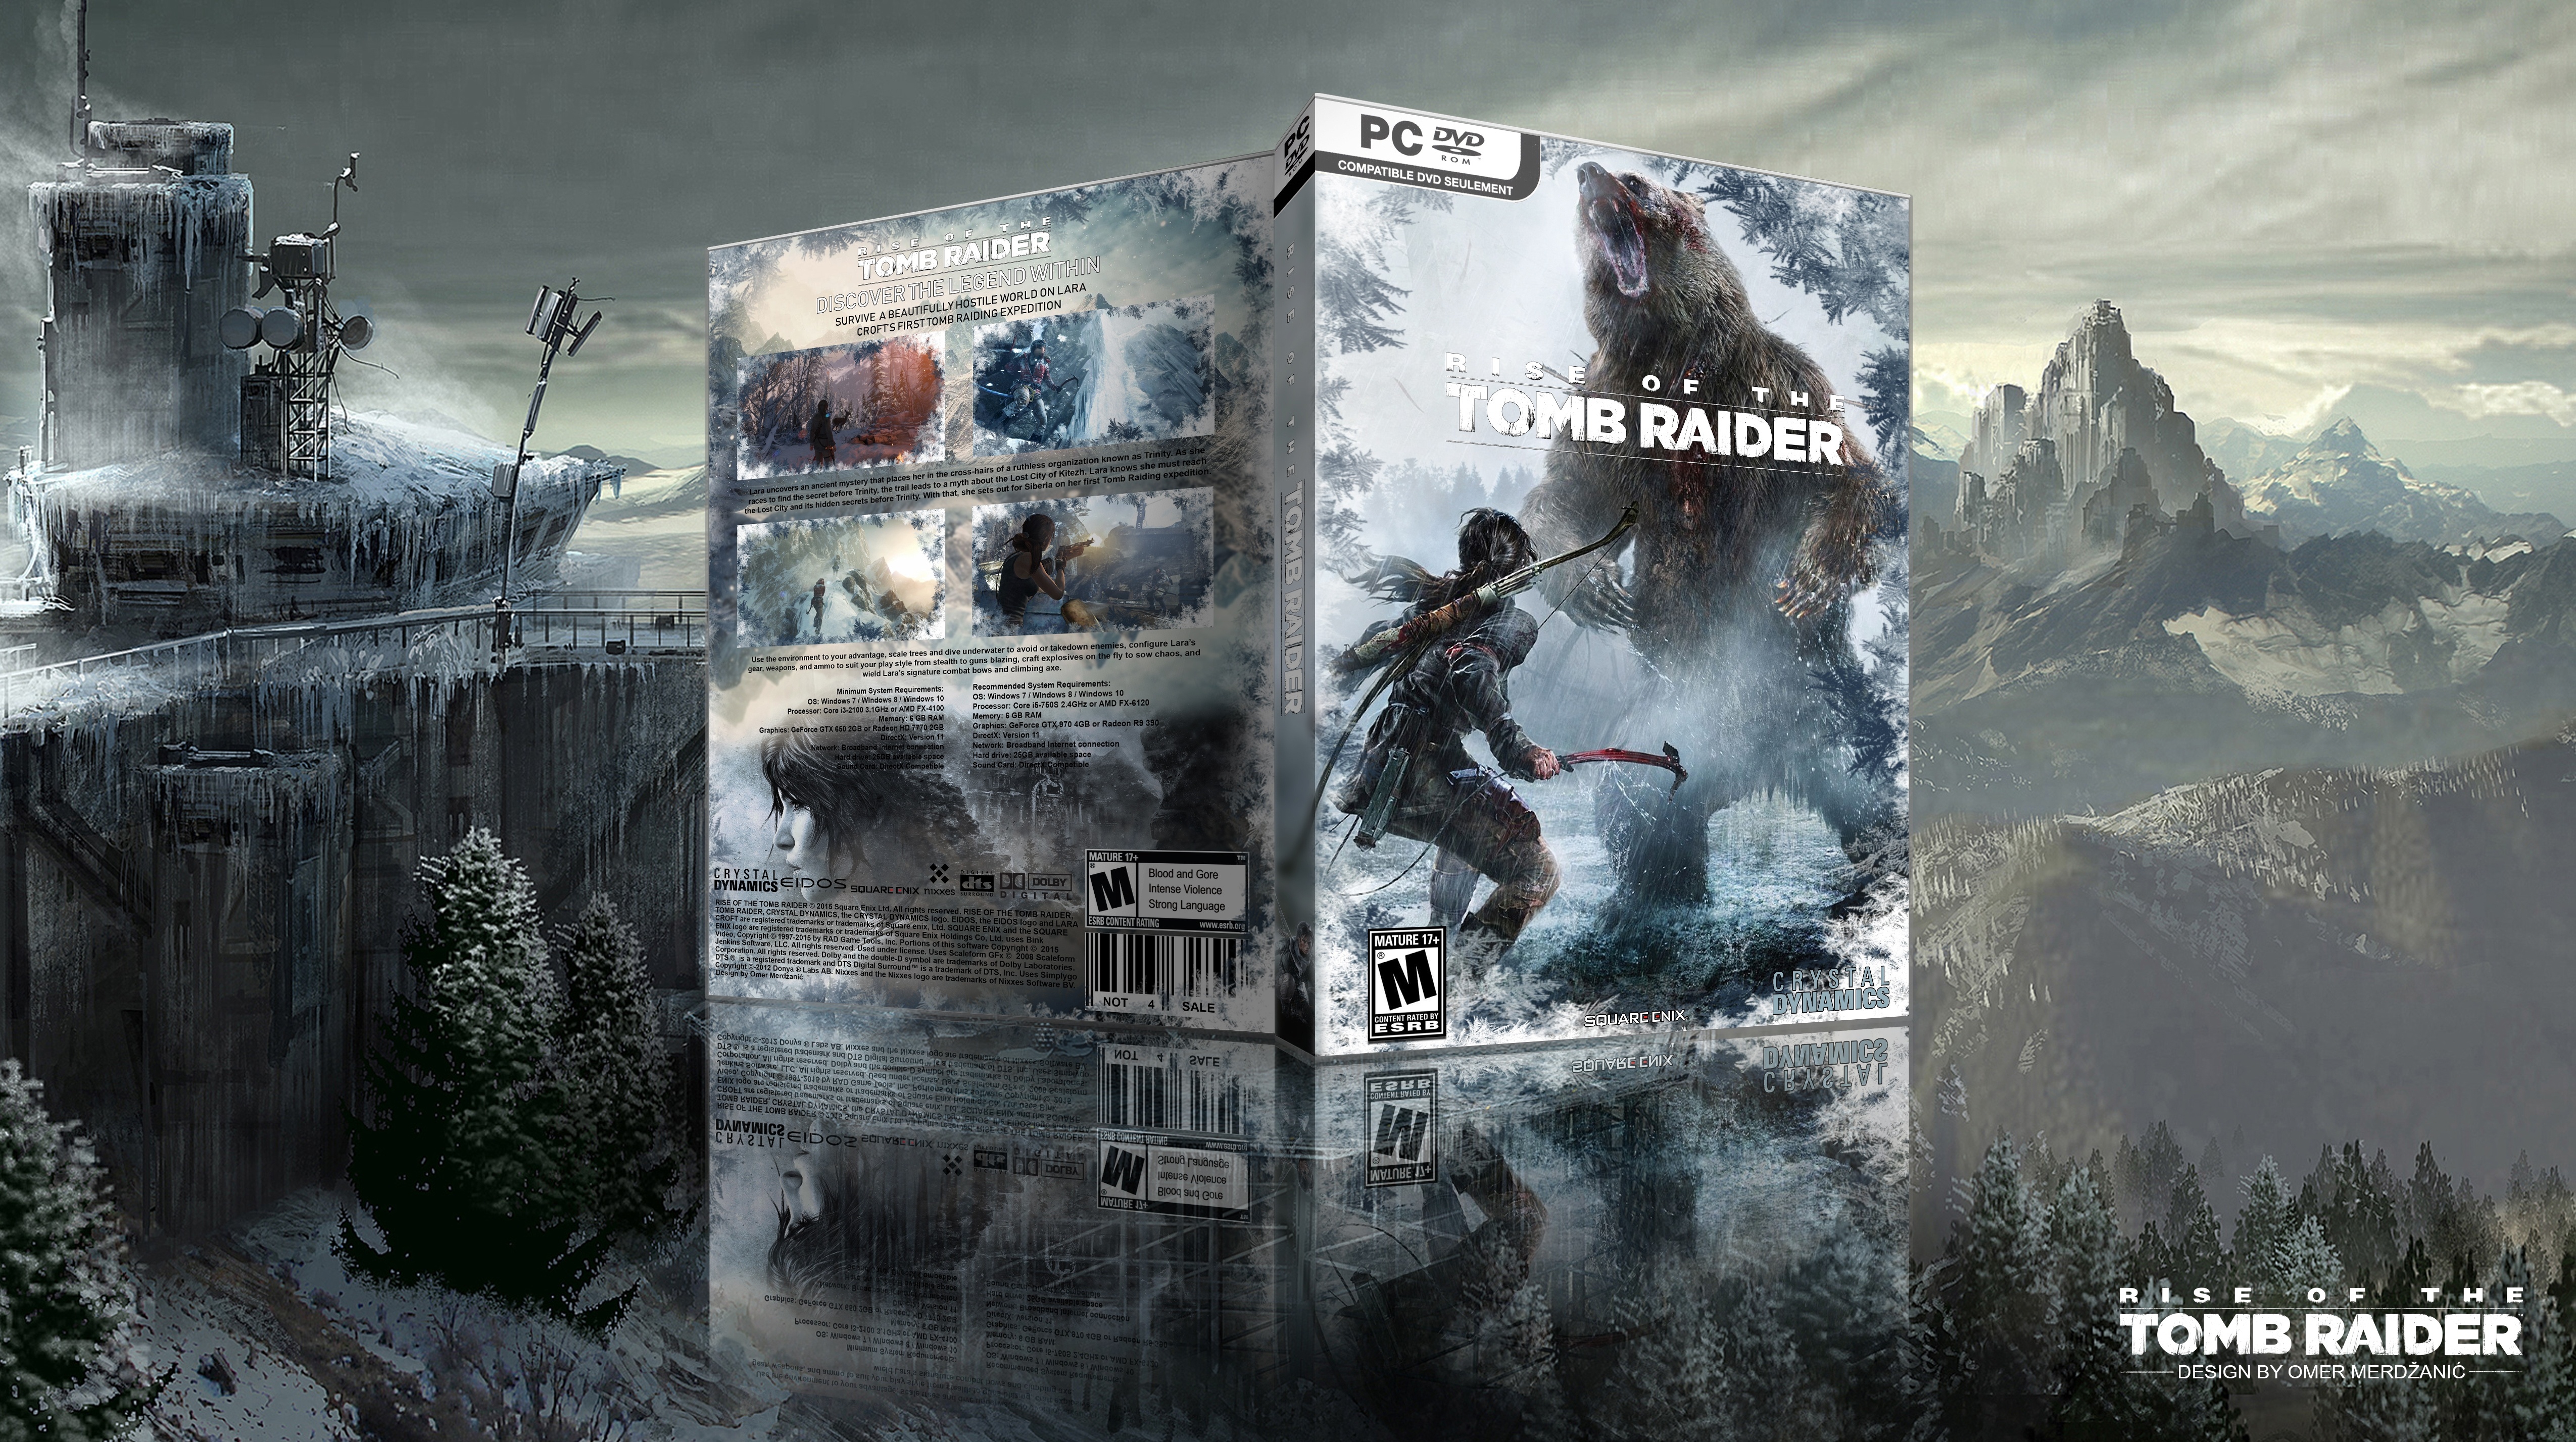 Rise of the Tomb Raider box cover